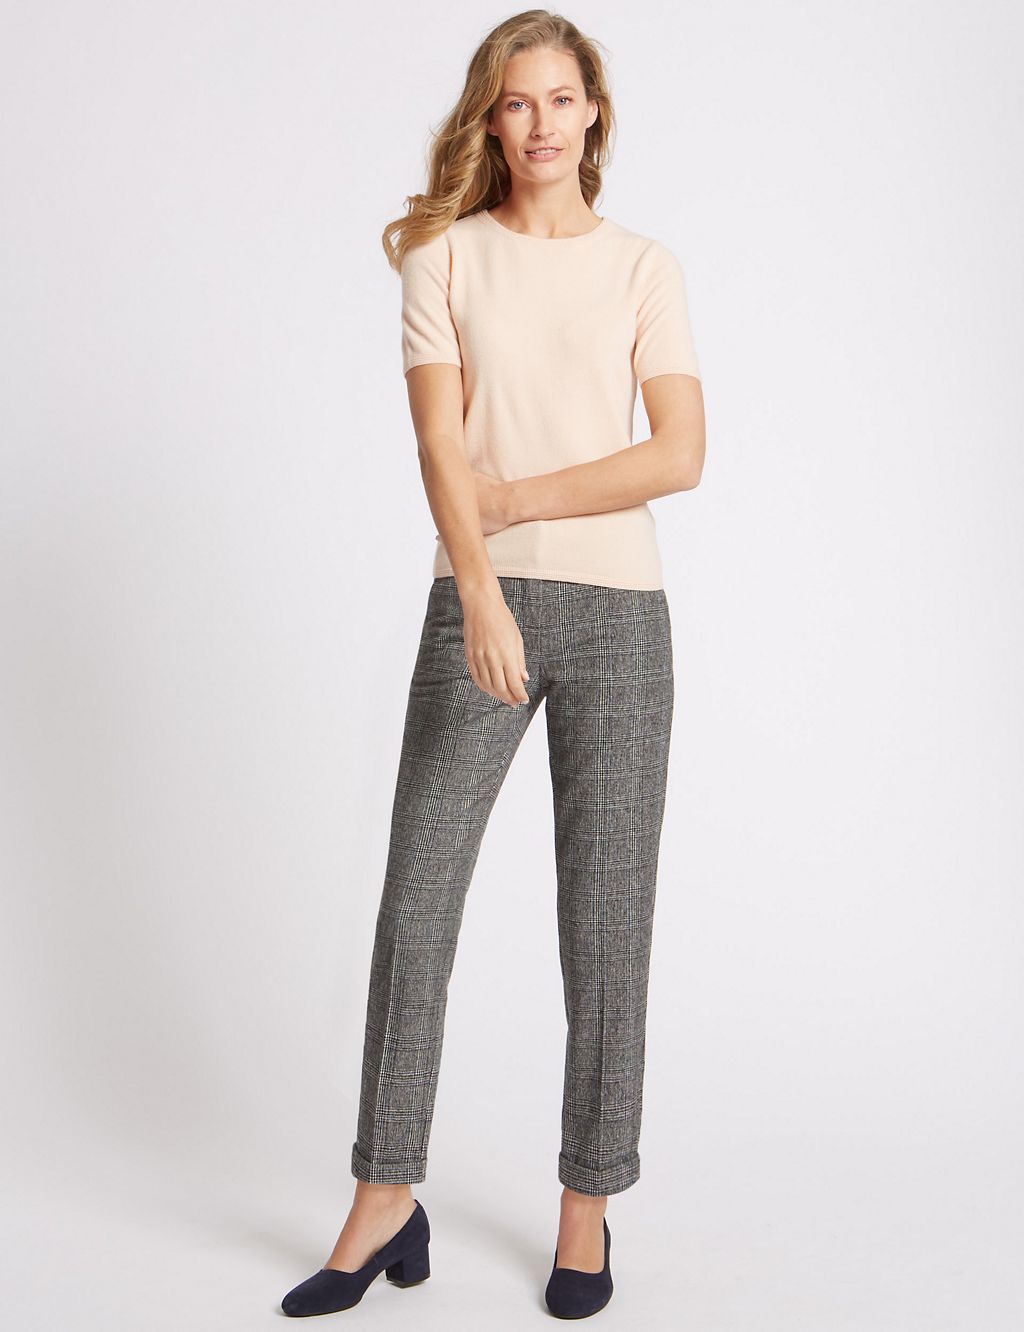 Checked Slim Leg Trousers 3 of 6